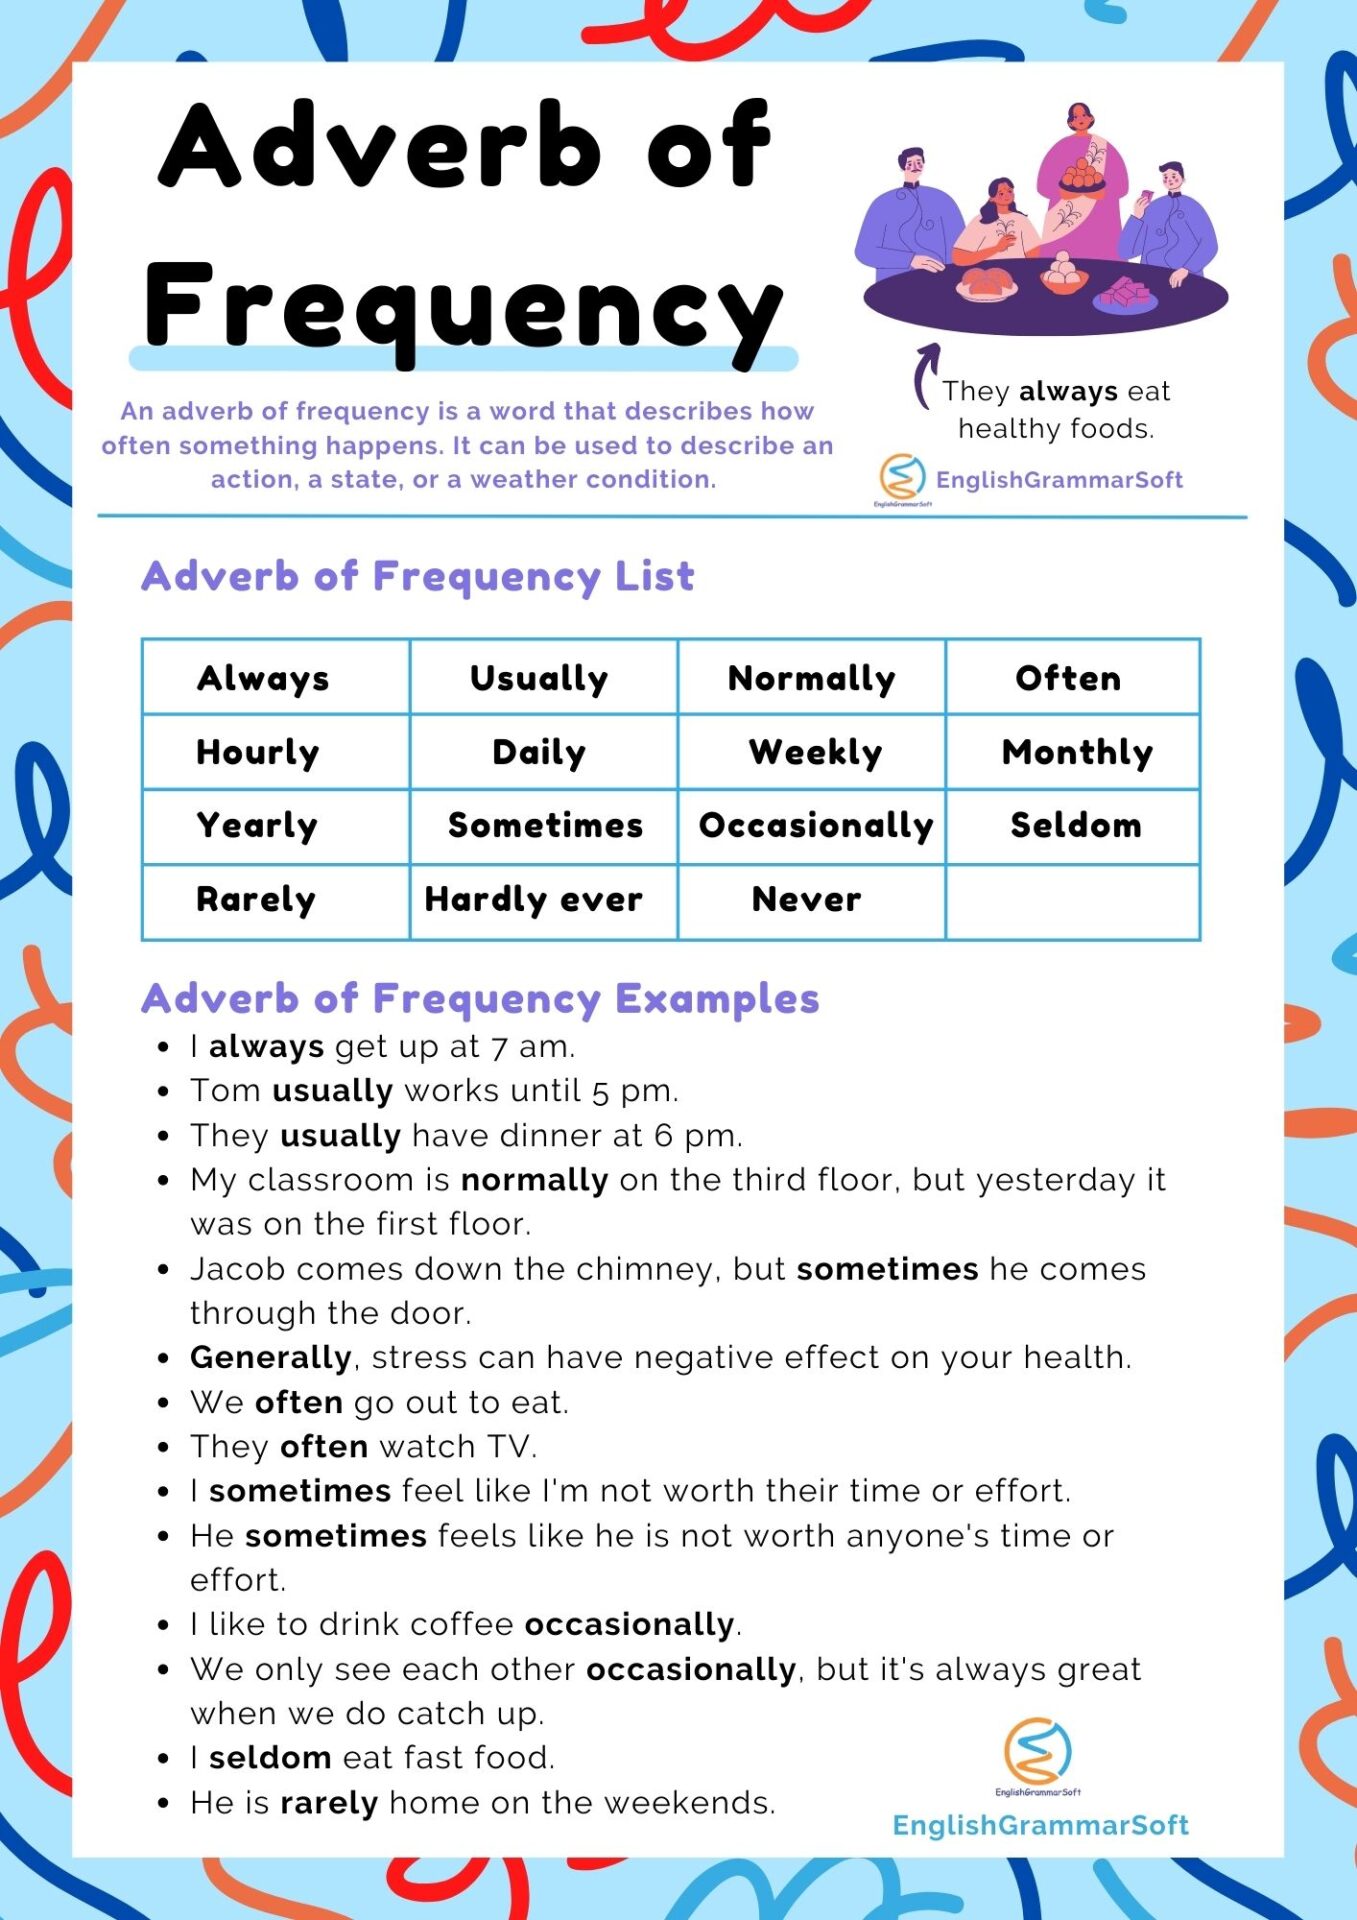 Adverb of Frequency List and Examples